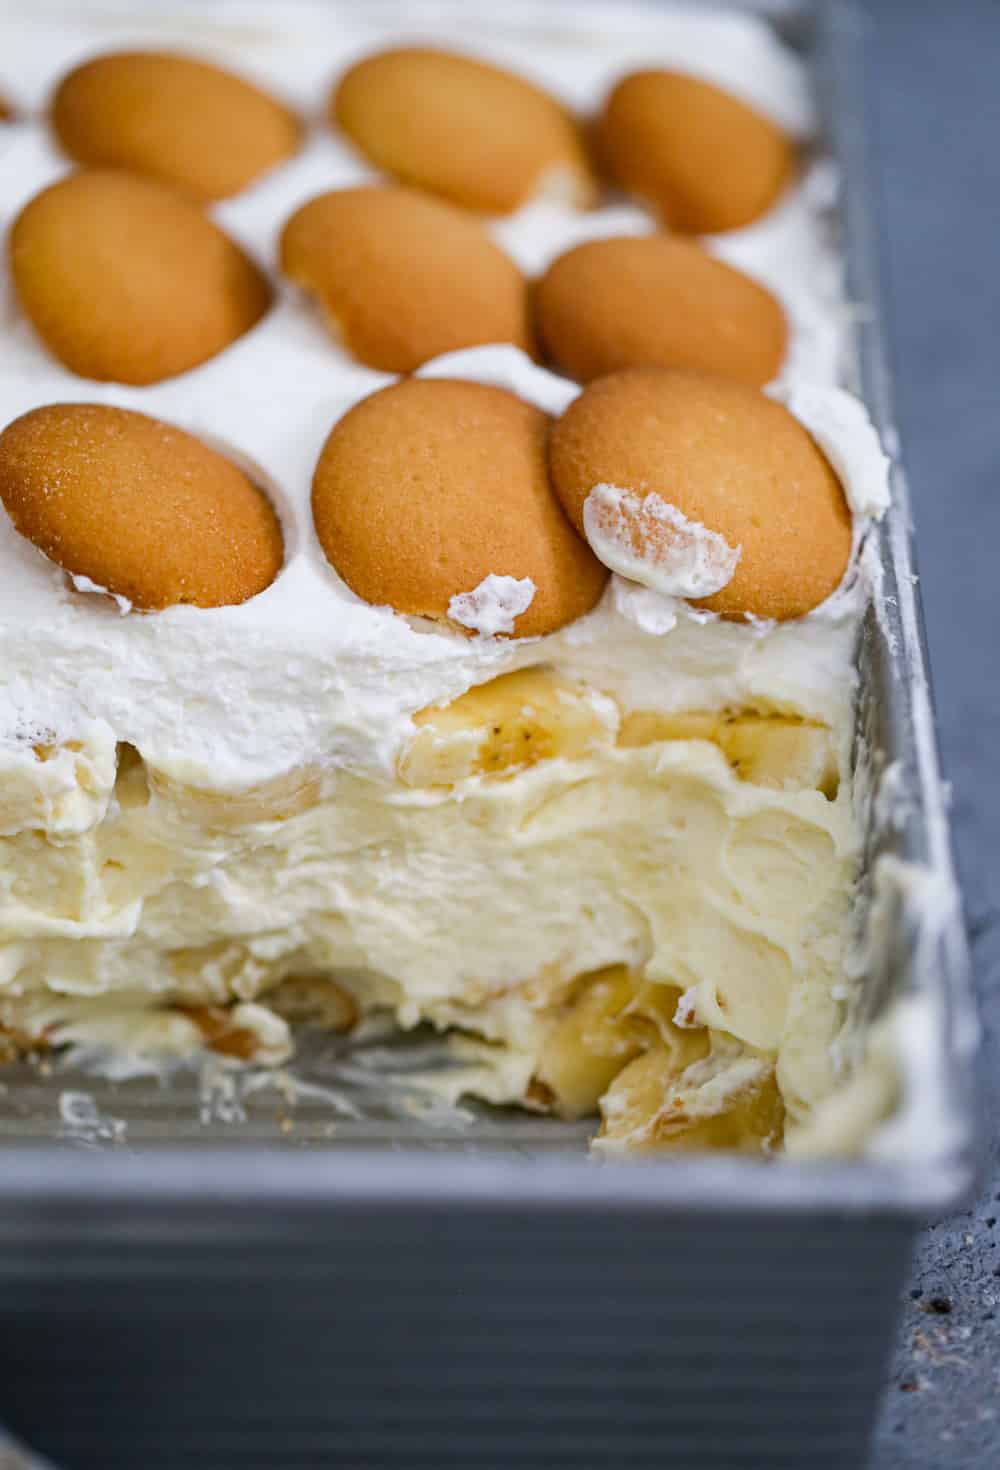 Easy 6 Ingredient Banana Pudding Dessert recipe with layers